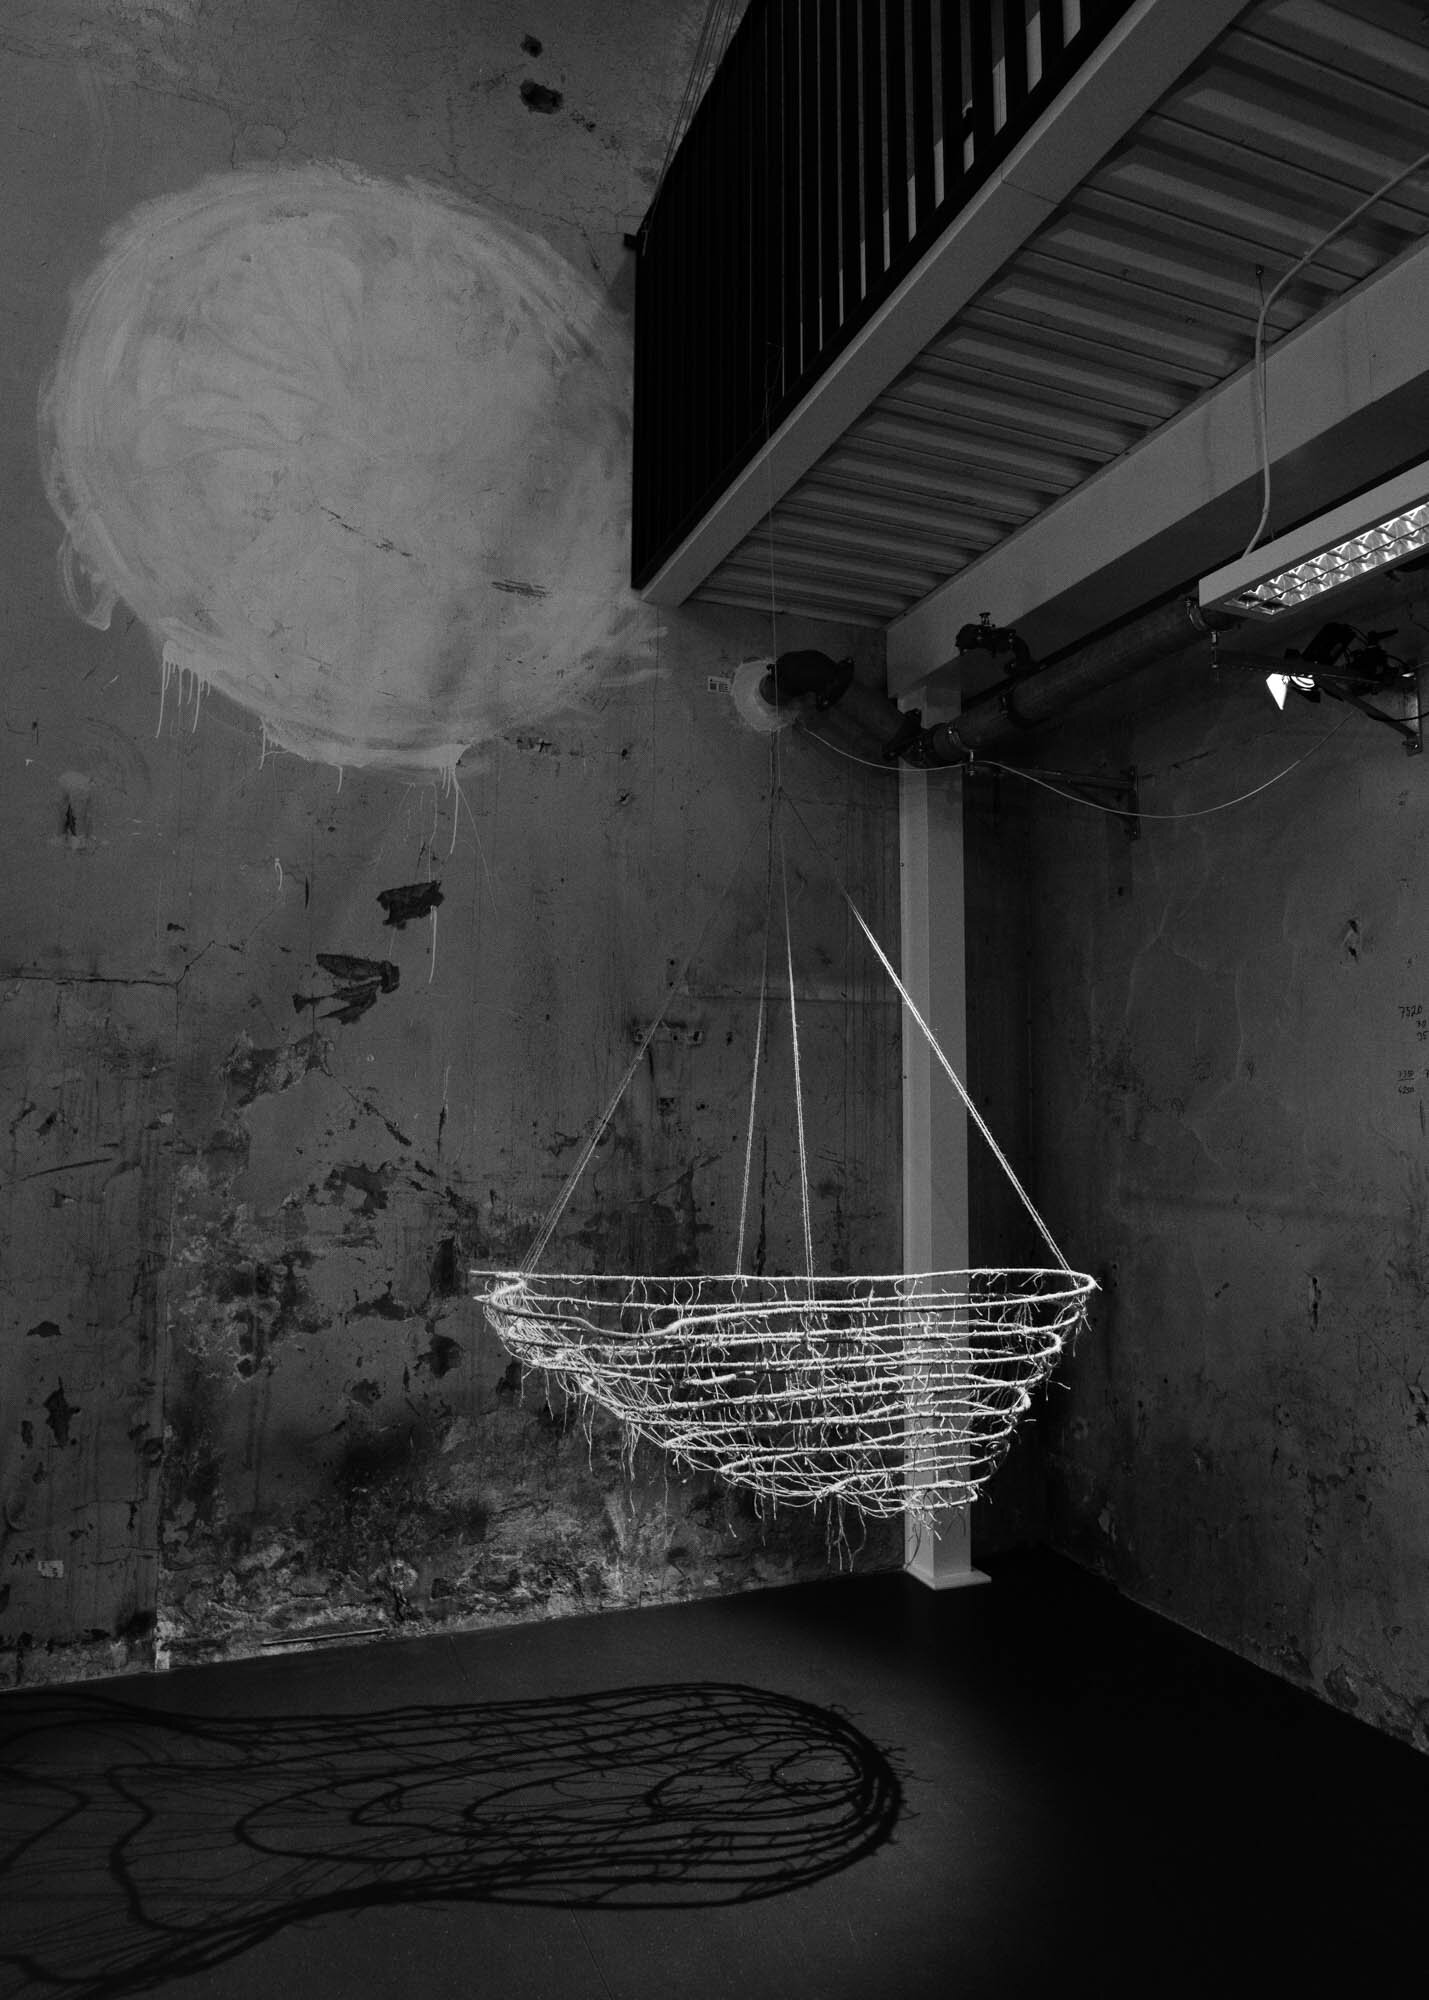  Veronica Mathisen’s hanging sculpture  Sea Land  made from jute and steel wire at Gallery Snerk.    Photo: Mihály Stefanovicz   